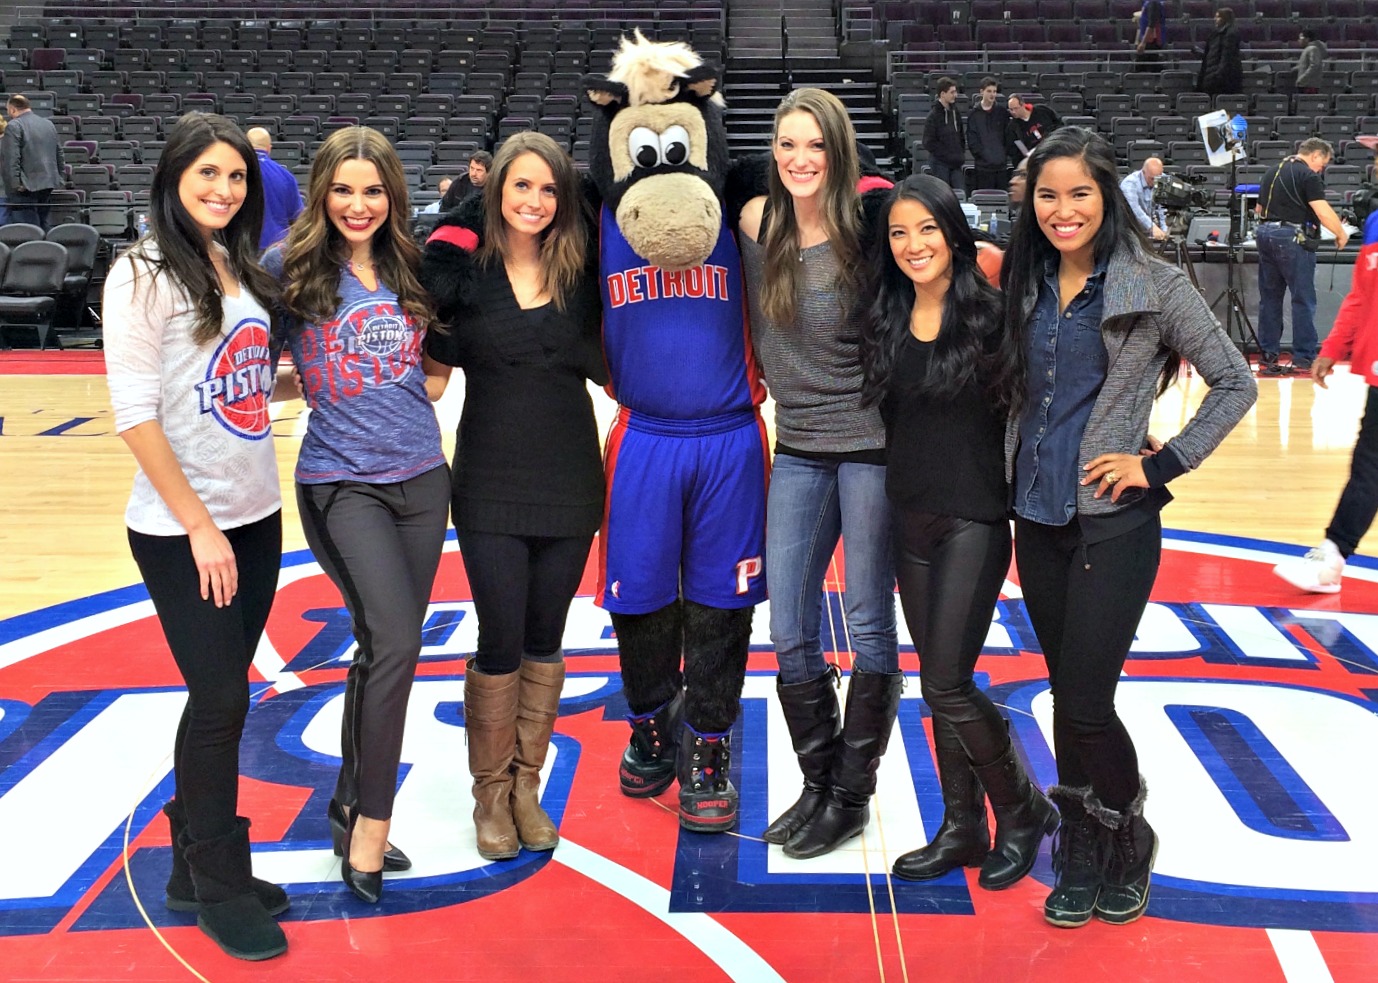 pistons game with HOOPER and friends